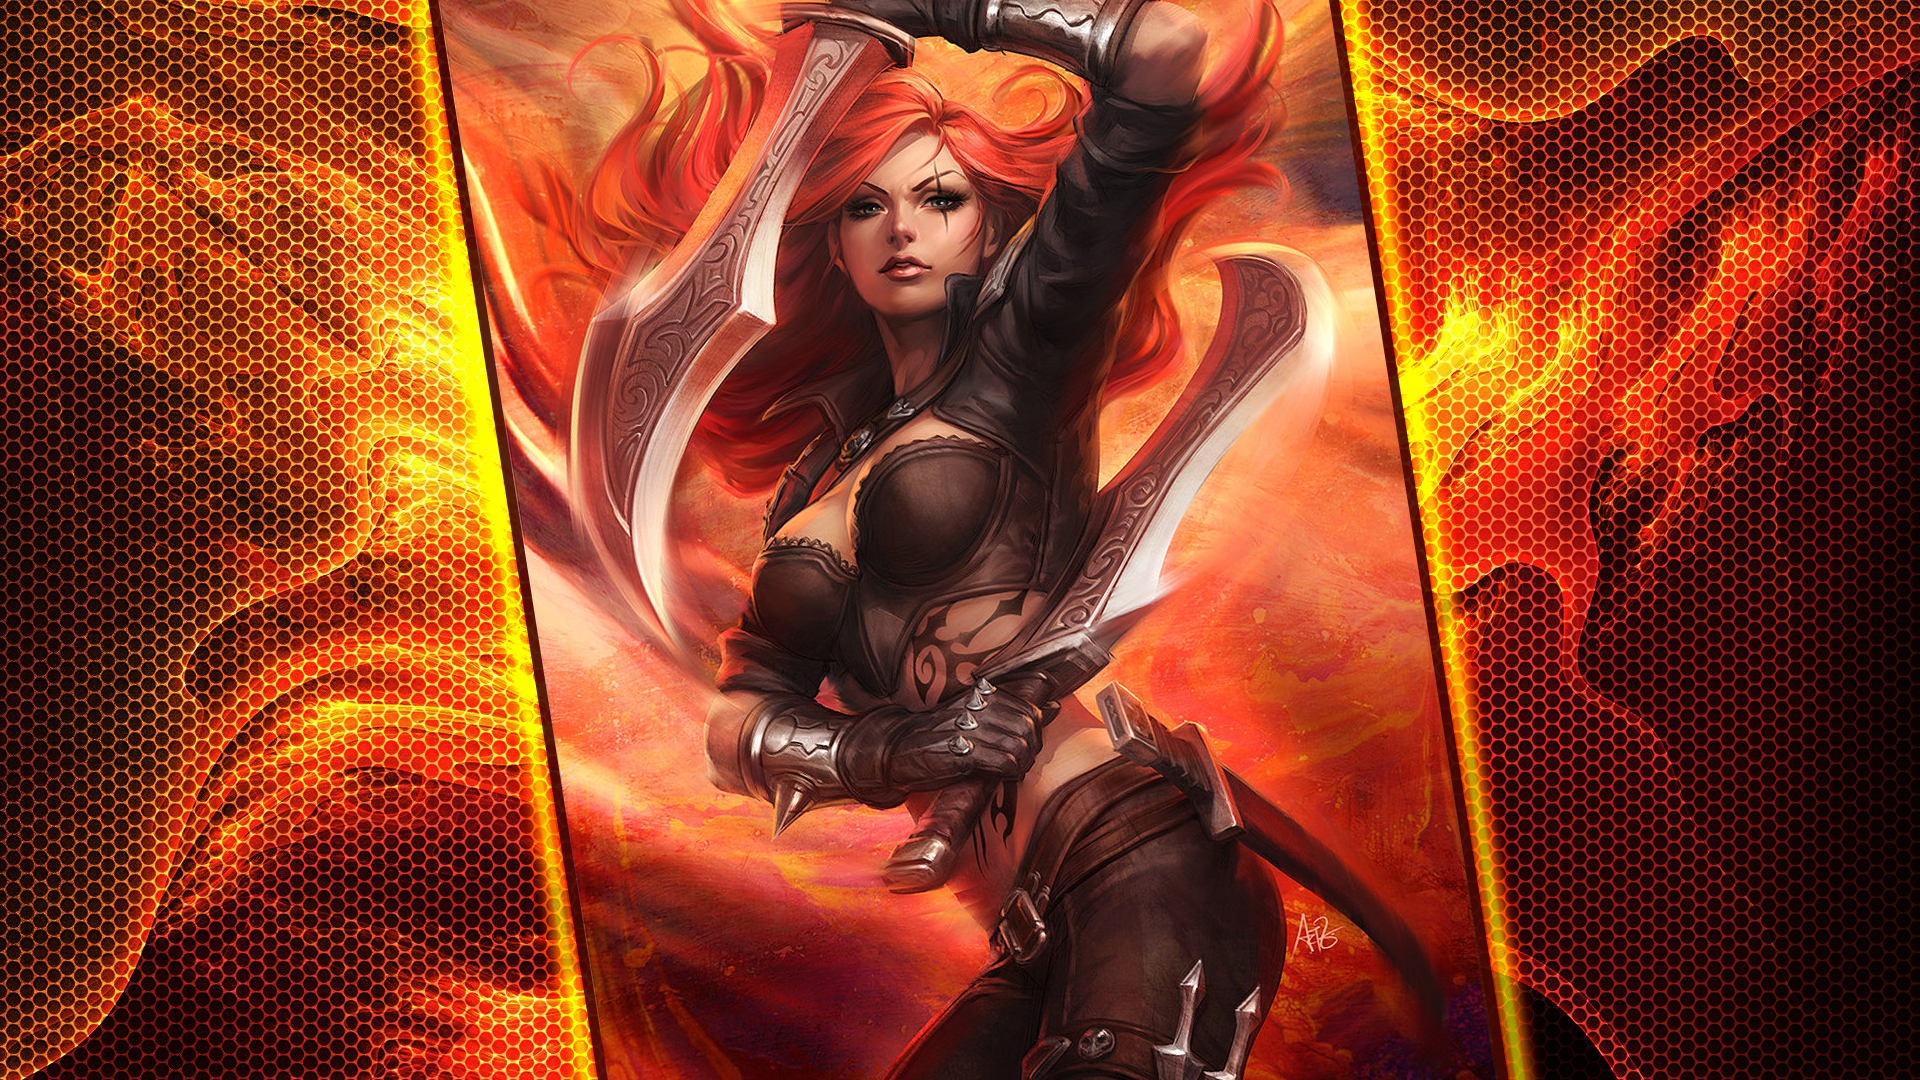 video game, league of legends, katarina (league of legends) wallpaper for mobile